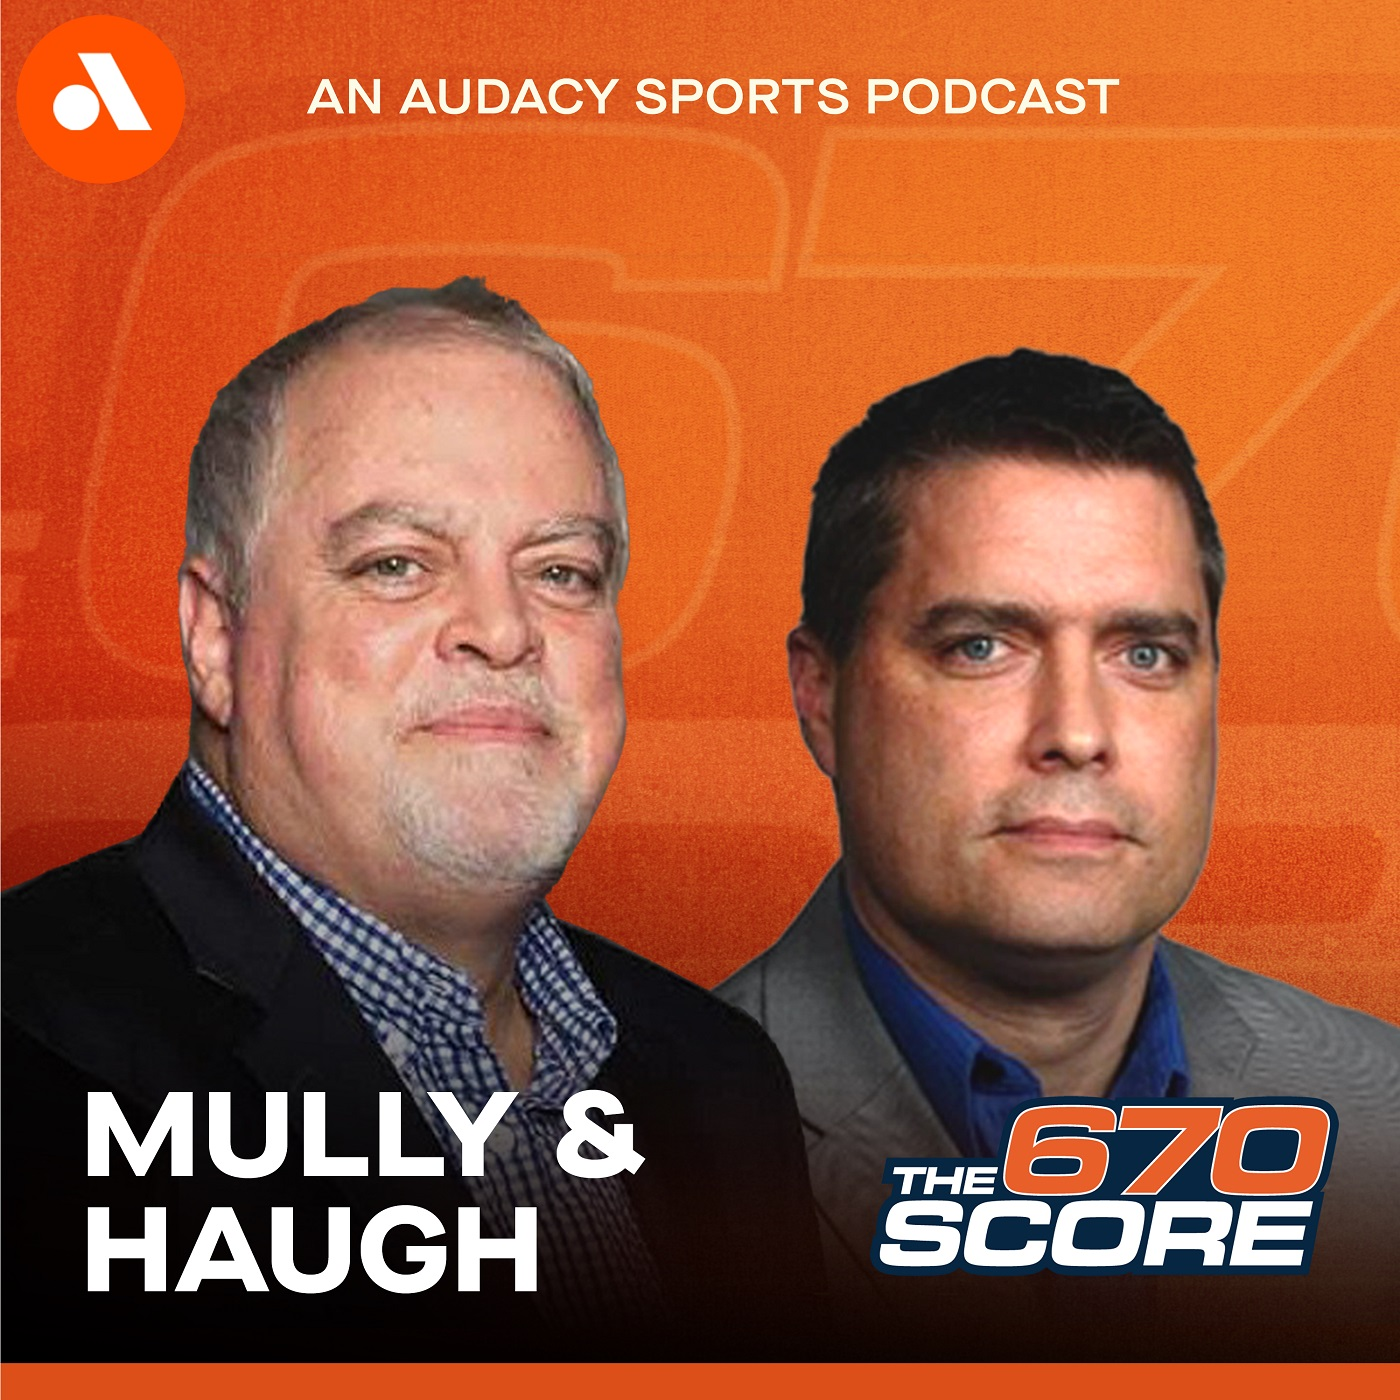 Mully & Haugh: Hub Arkush interview, Tiger Woods hospitalized (Hour 3)